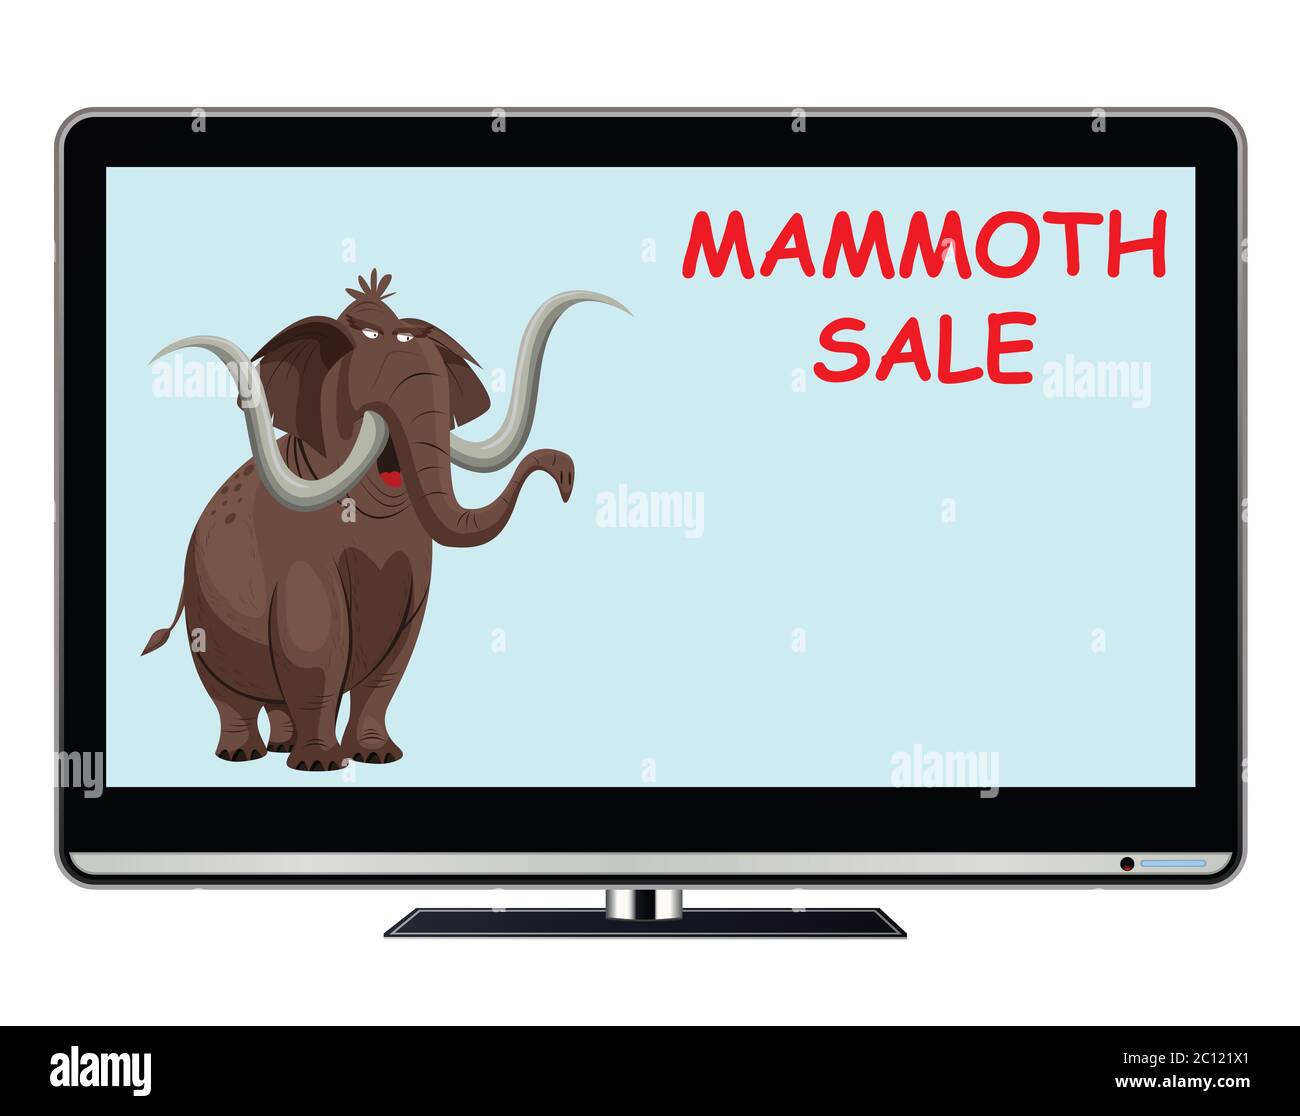 Mammoth sale television advertisement with copy space for own text or graphics isolated on white background Stock Photo